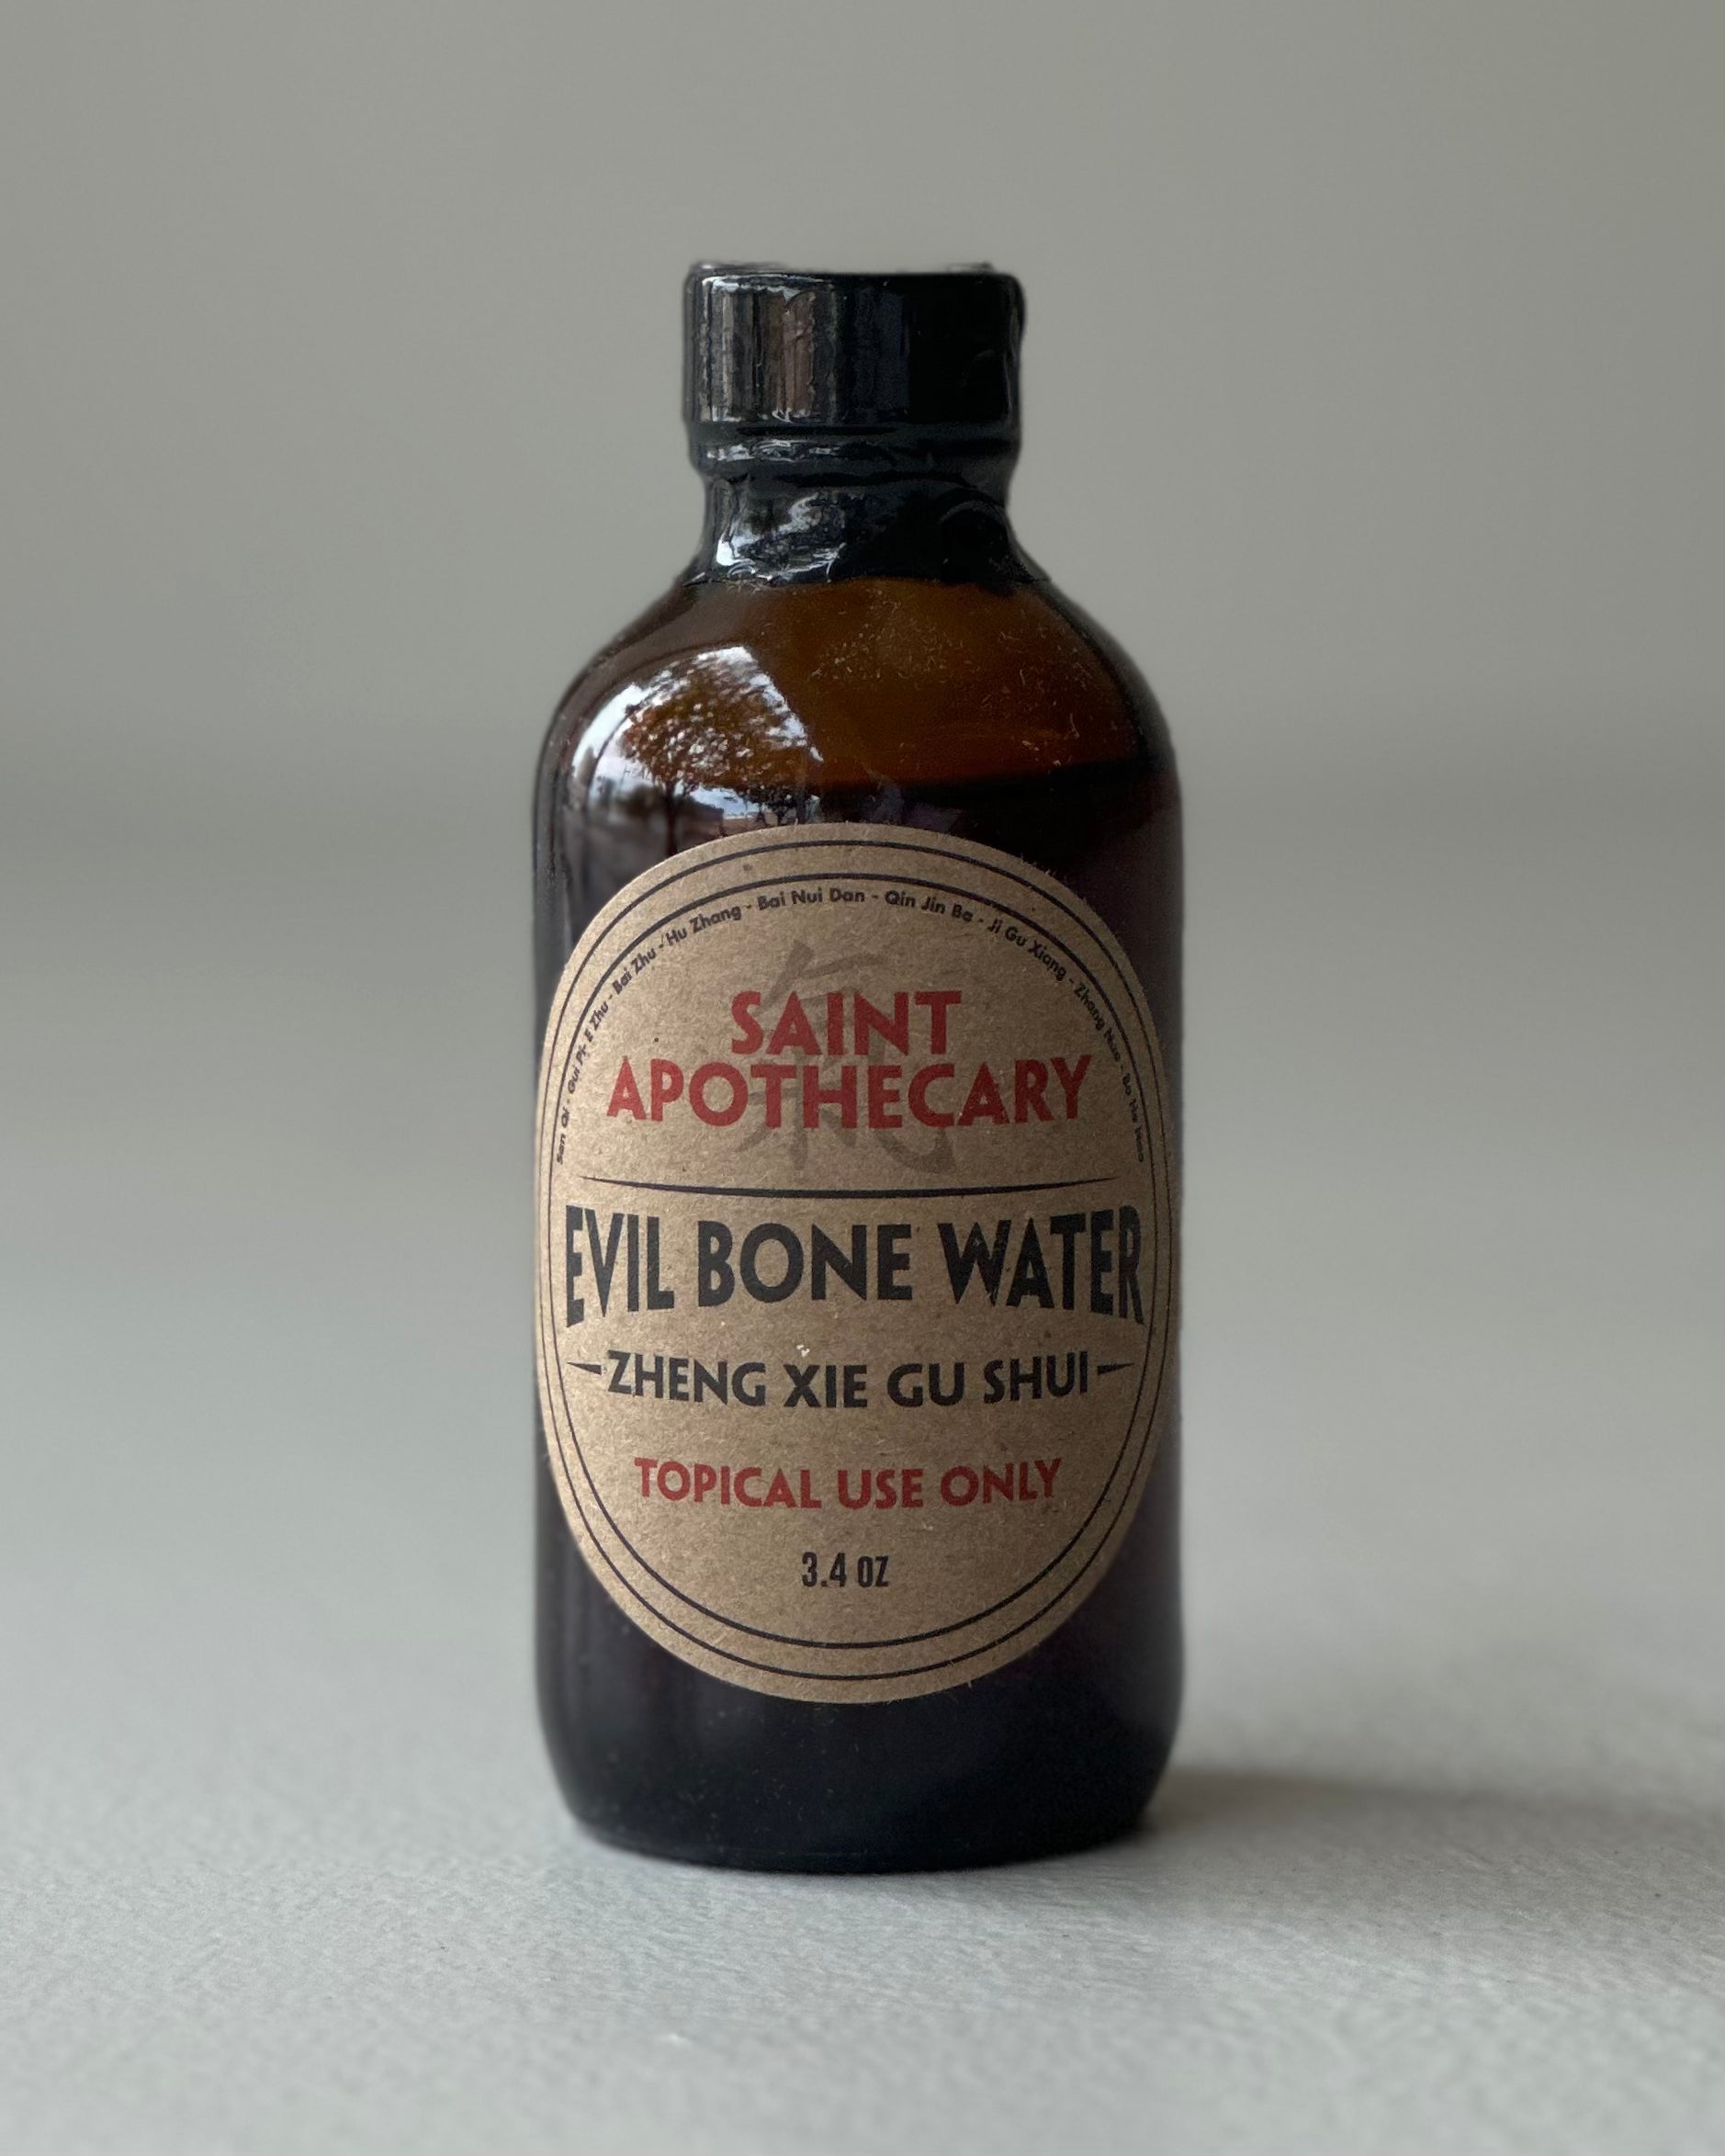 Evil Bone Water bottle from Saint Apothecary, a traditional Chinese medicinal product for pain relief and healing